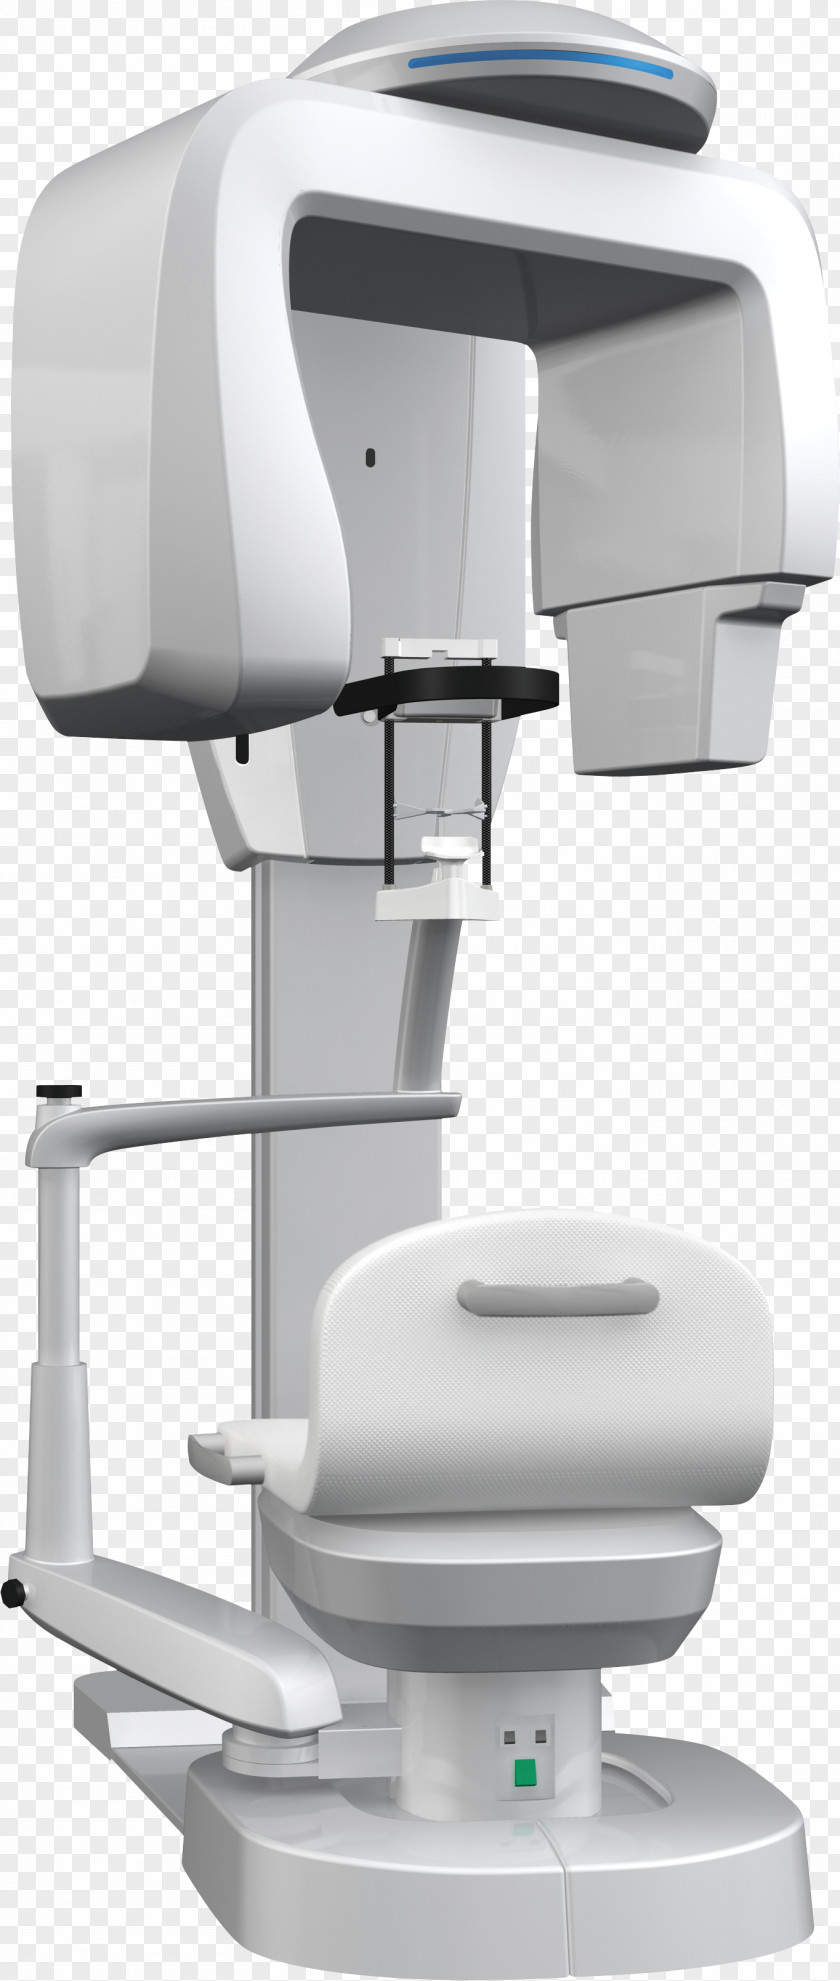 3d Dental Treatment For Toothache Cone Beam Computed Tomography Dentistry Image Scanner Endodontics PNG